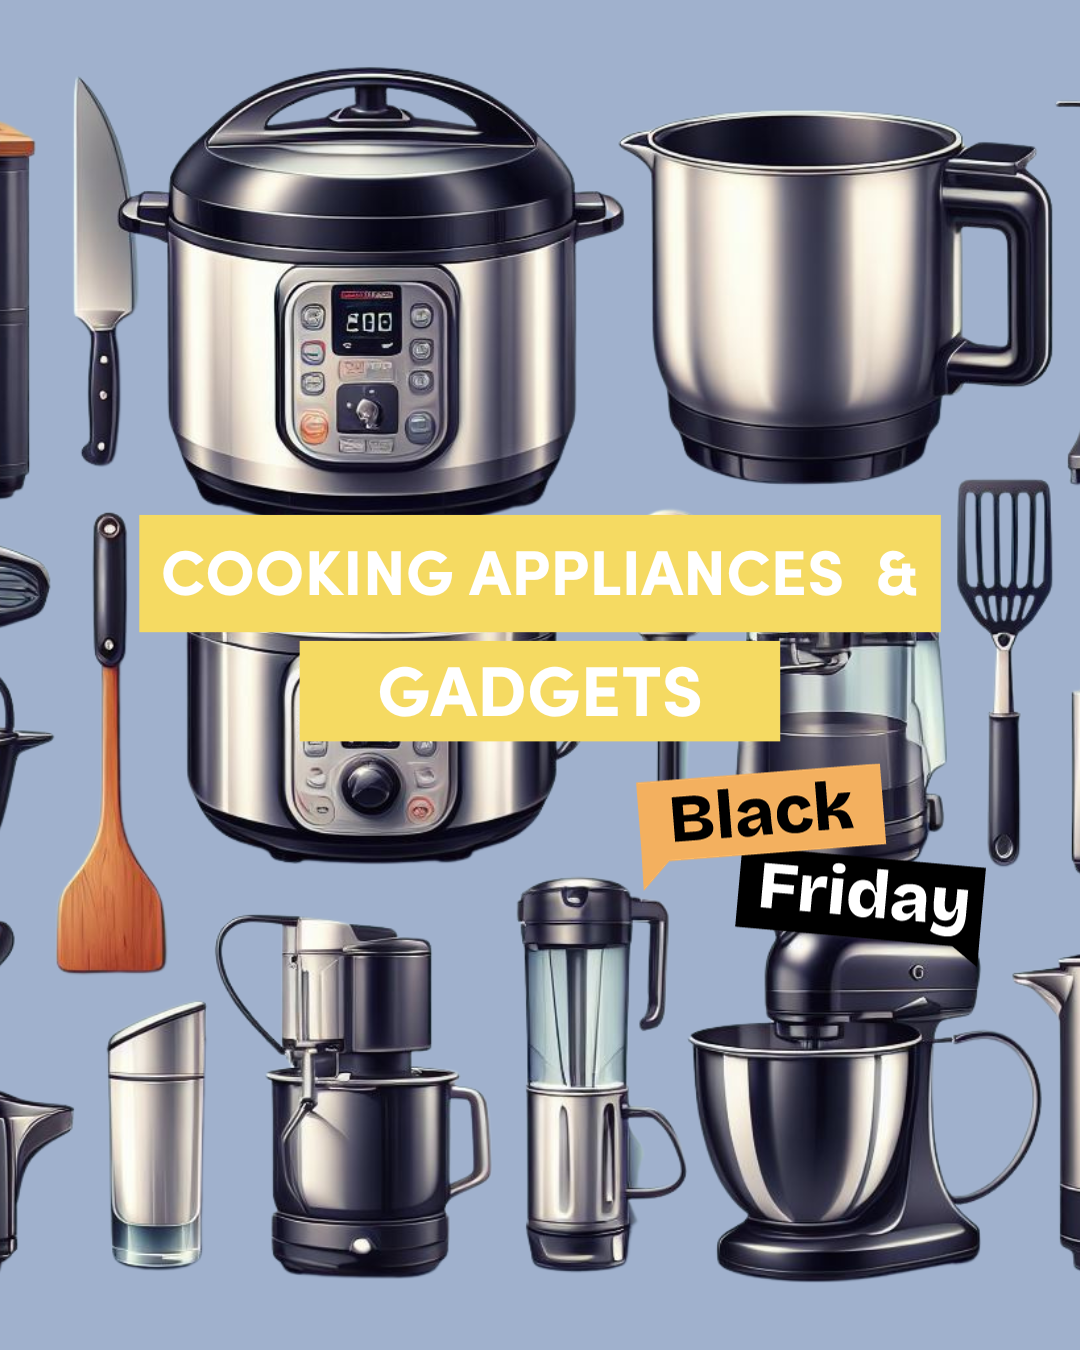 Best cooking products to buy this black friday